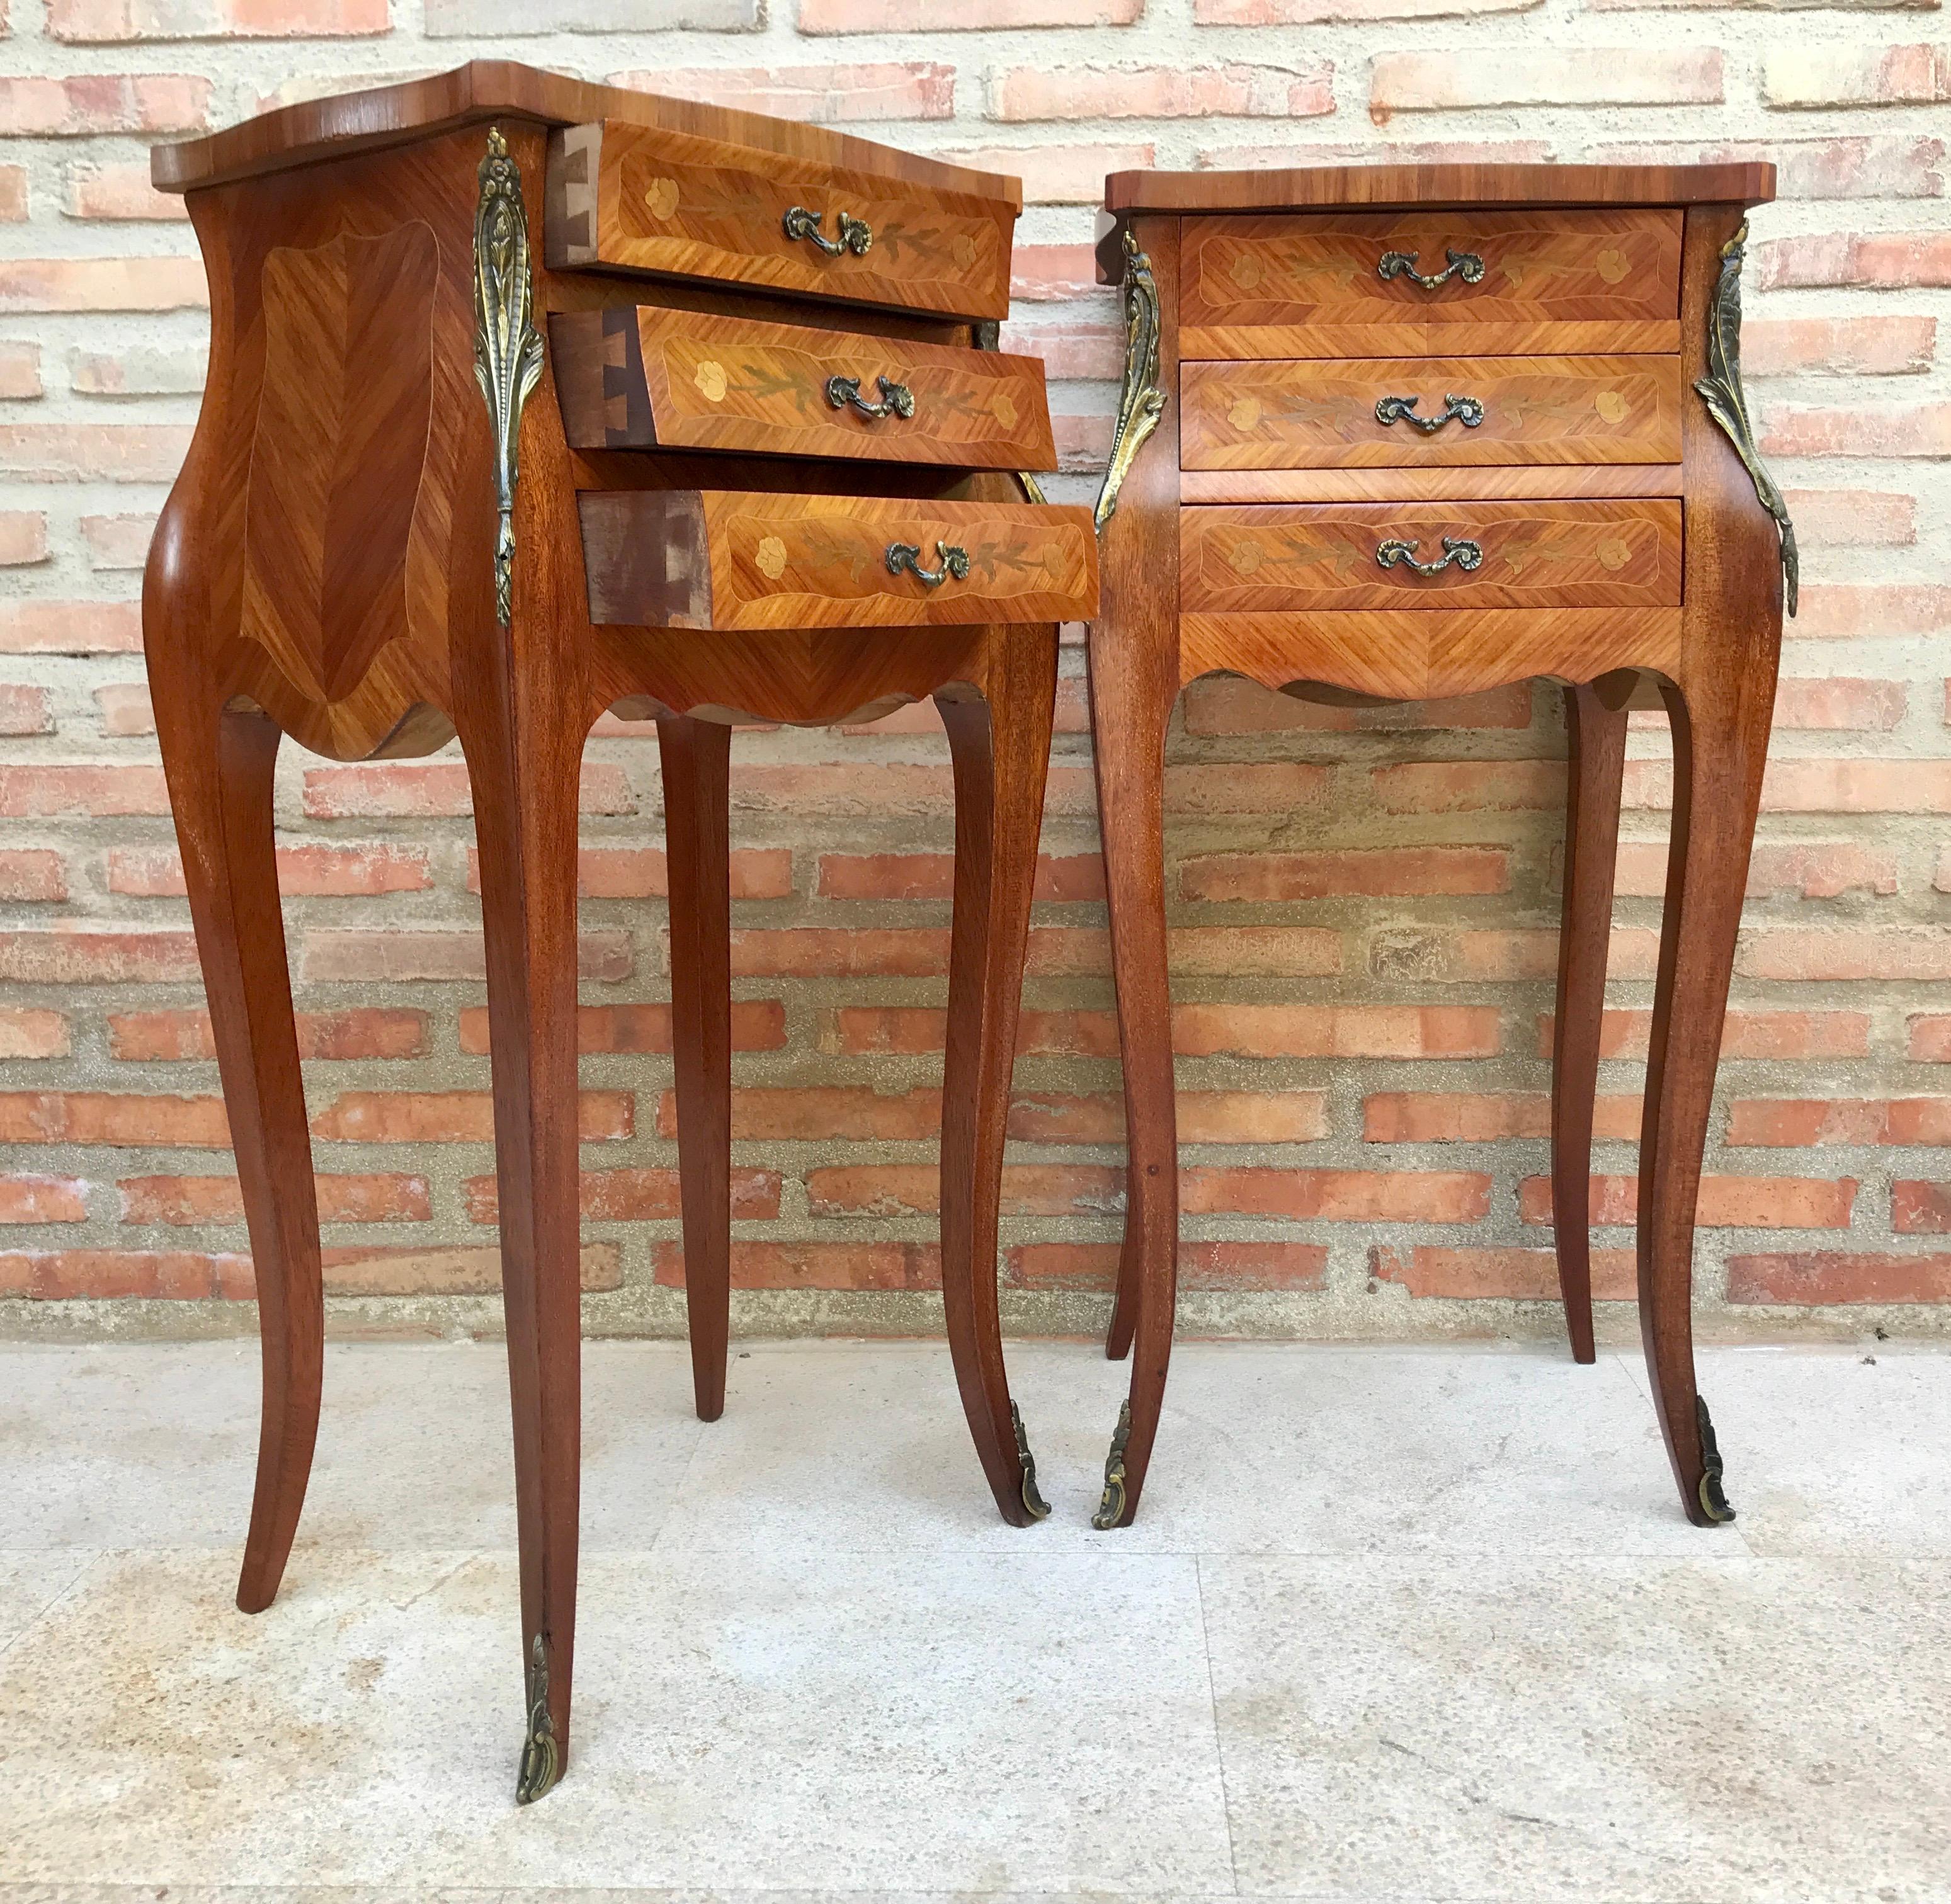 French Classic Louis Vx Style Marquetry Nightstands with Three Drawers, 1920s, S In Good Condition For Sale In Miami, FL